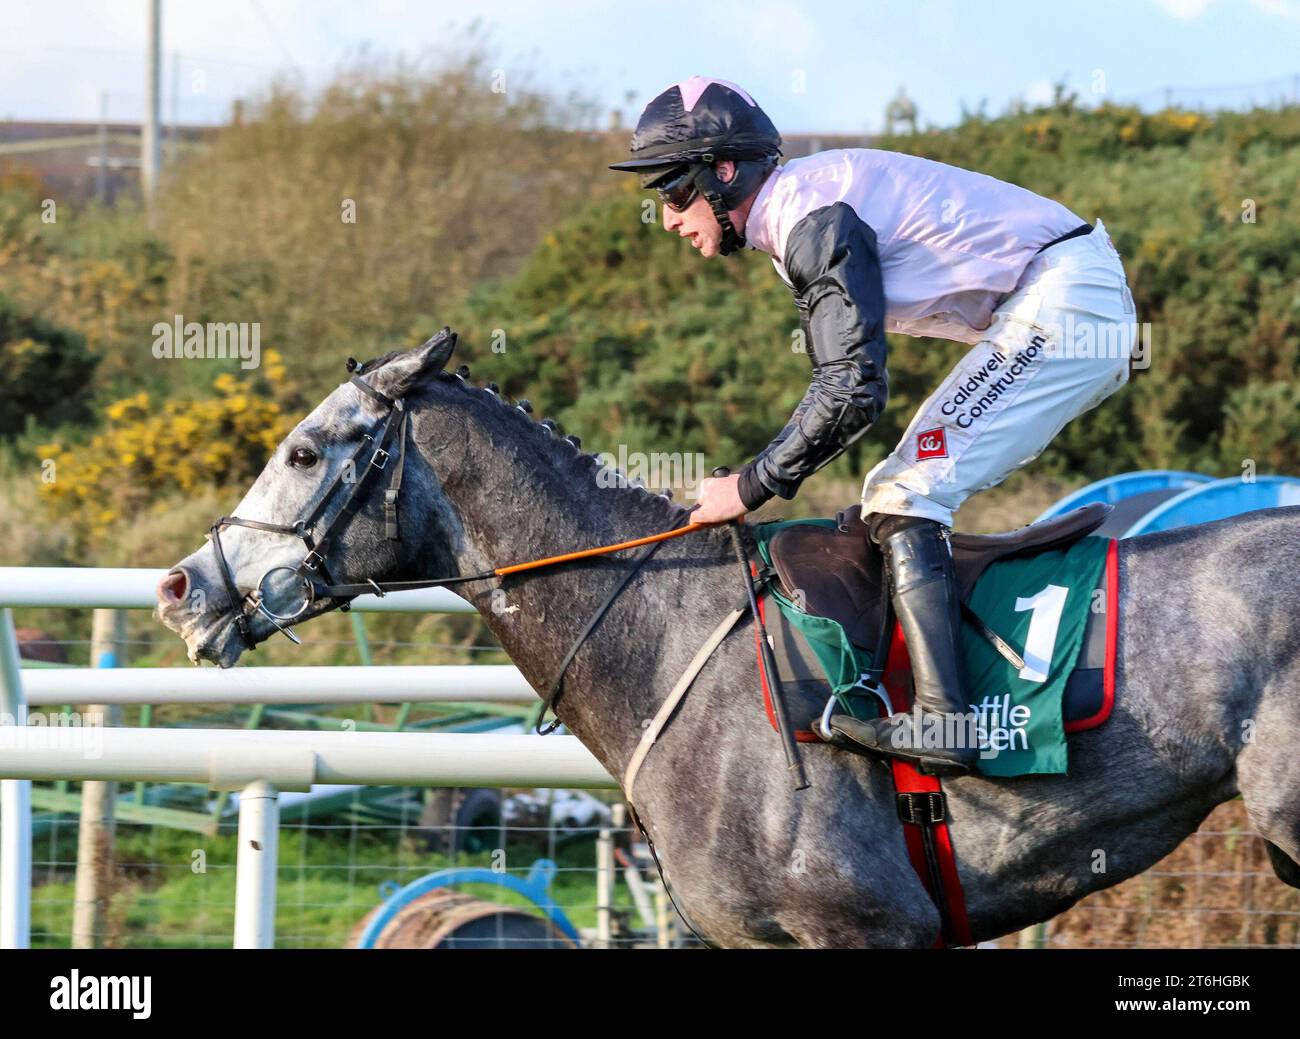 Down Royal Racecourse, Lisburn, Northern Ireland. 10th Nov 2023. The Ladbrokes Festival of Racing (Day 1) got underway today after last week's weather-related postponement.The feature race of the day was the BOTTLEGREEN HURDLE (GRADE 3) (4yo+) with €29,500 for the winner. The race was won by Irish Point (1) (half-white half-pink tunic) ridden by Jack Kennedy and trained by Gordon Elliott. Credit: CAZIMB/Alamy Live News. Stock Photo